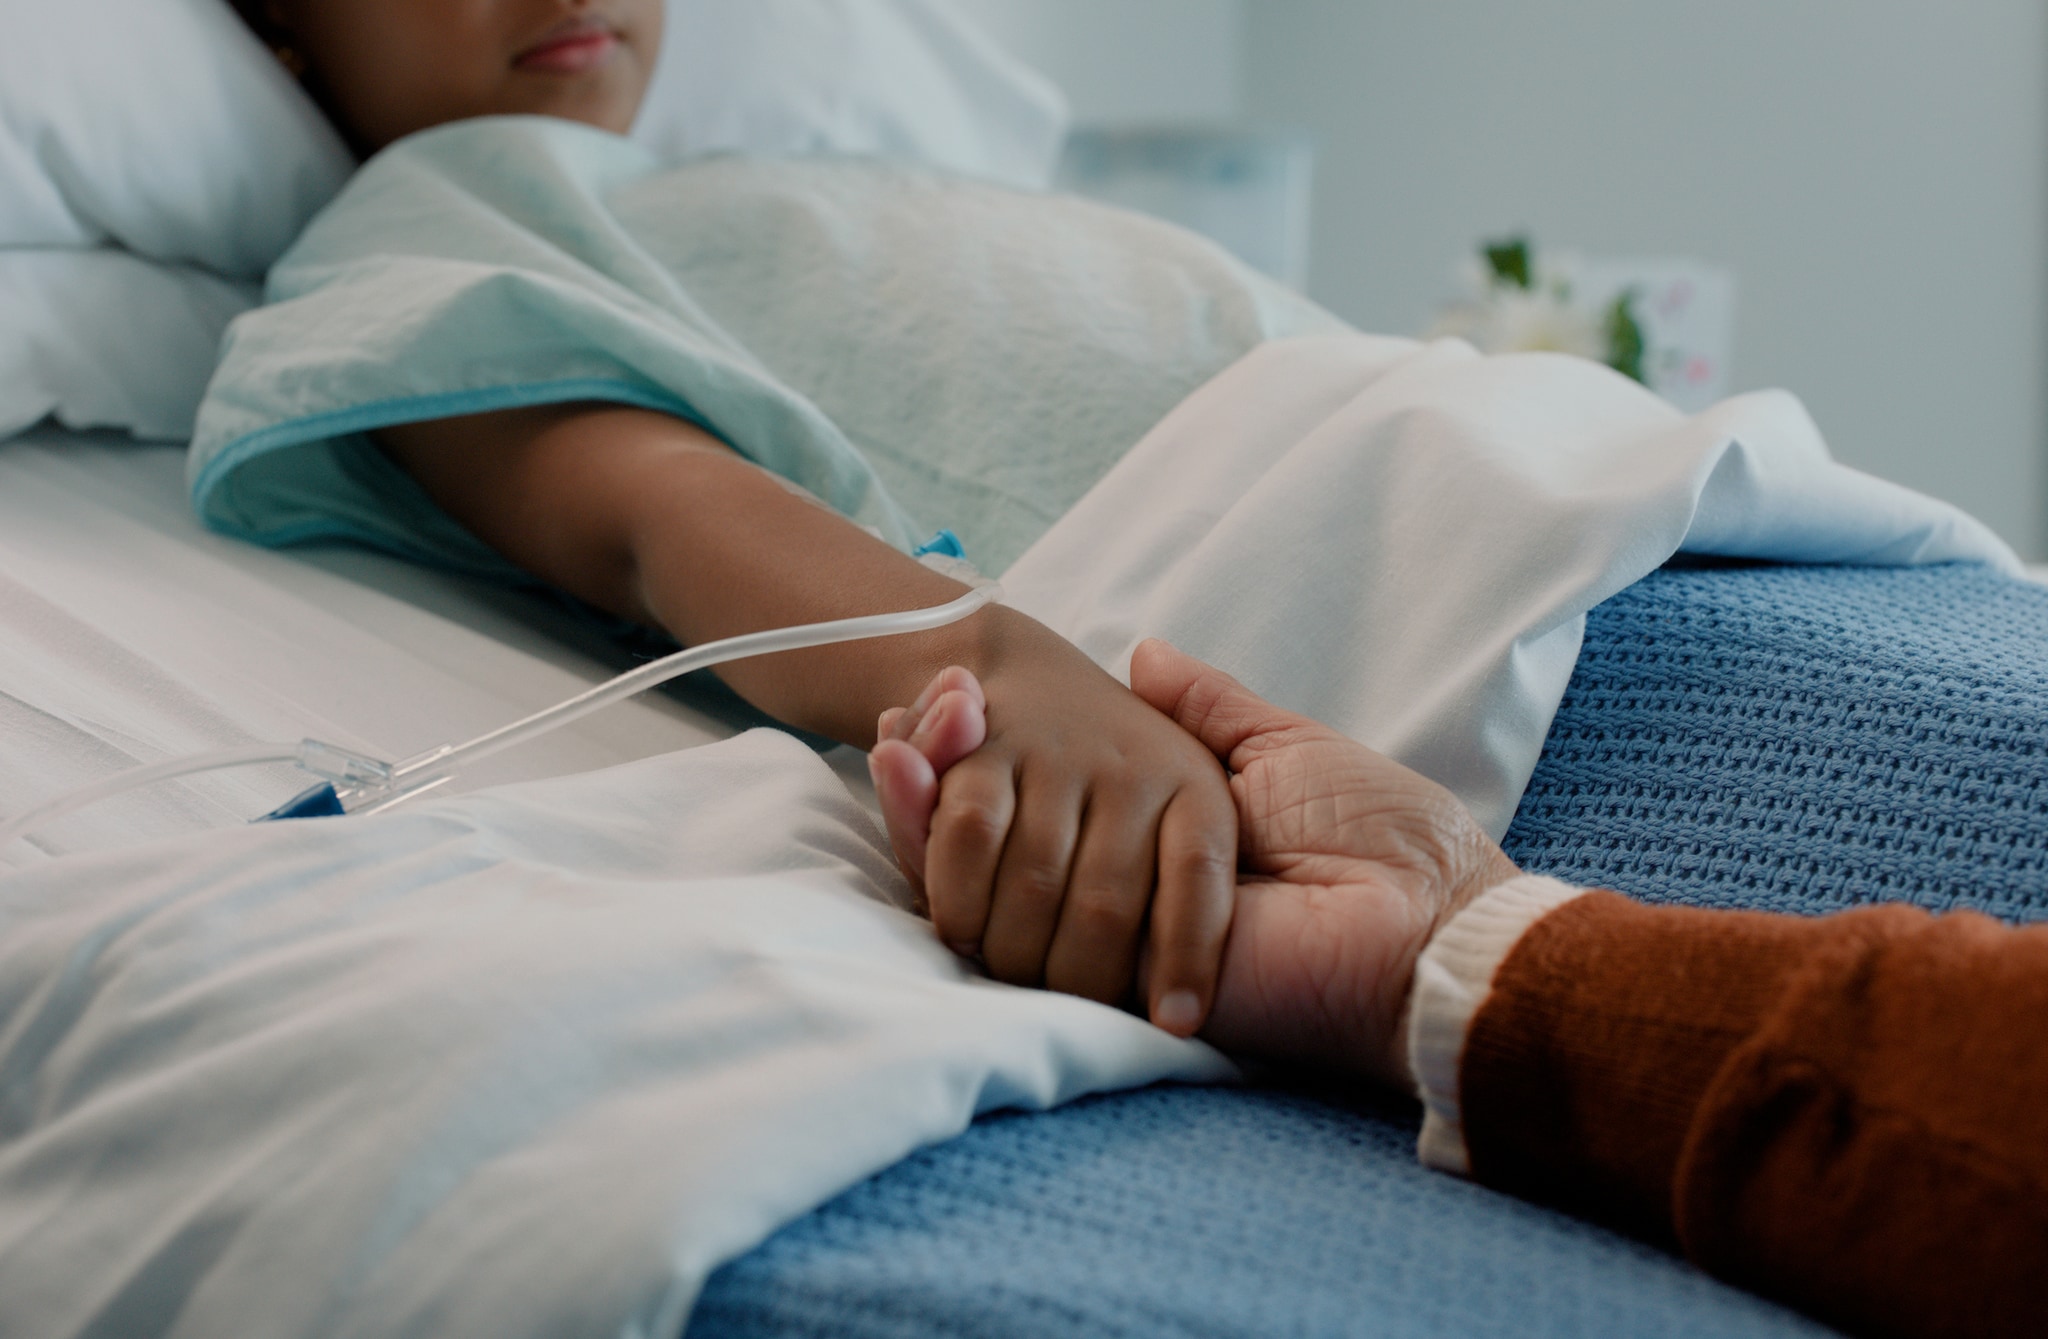 Young patient and caregiver holding hands in a hospital setting